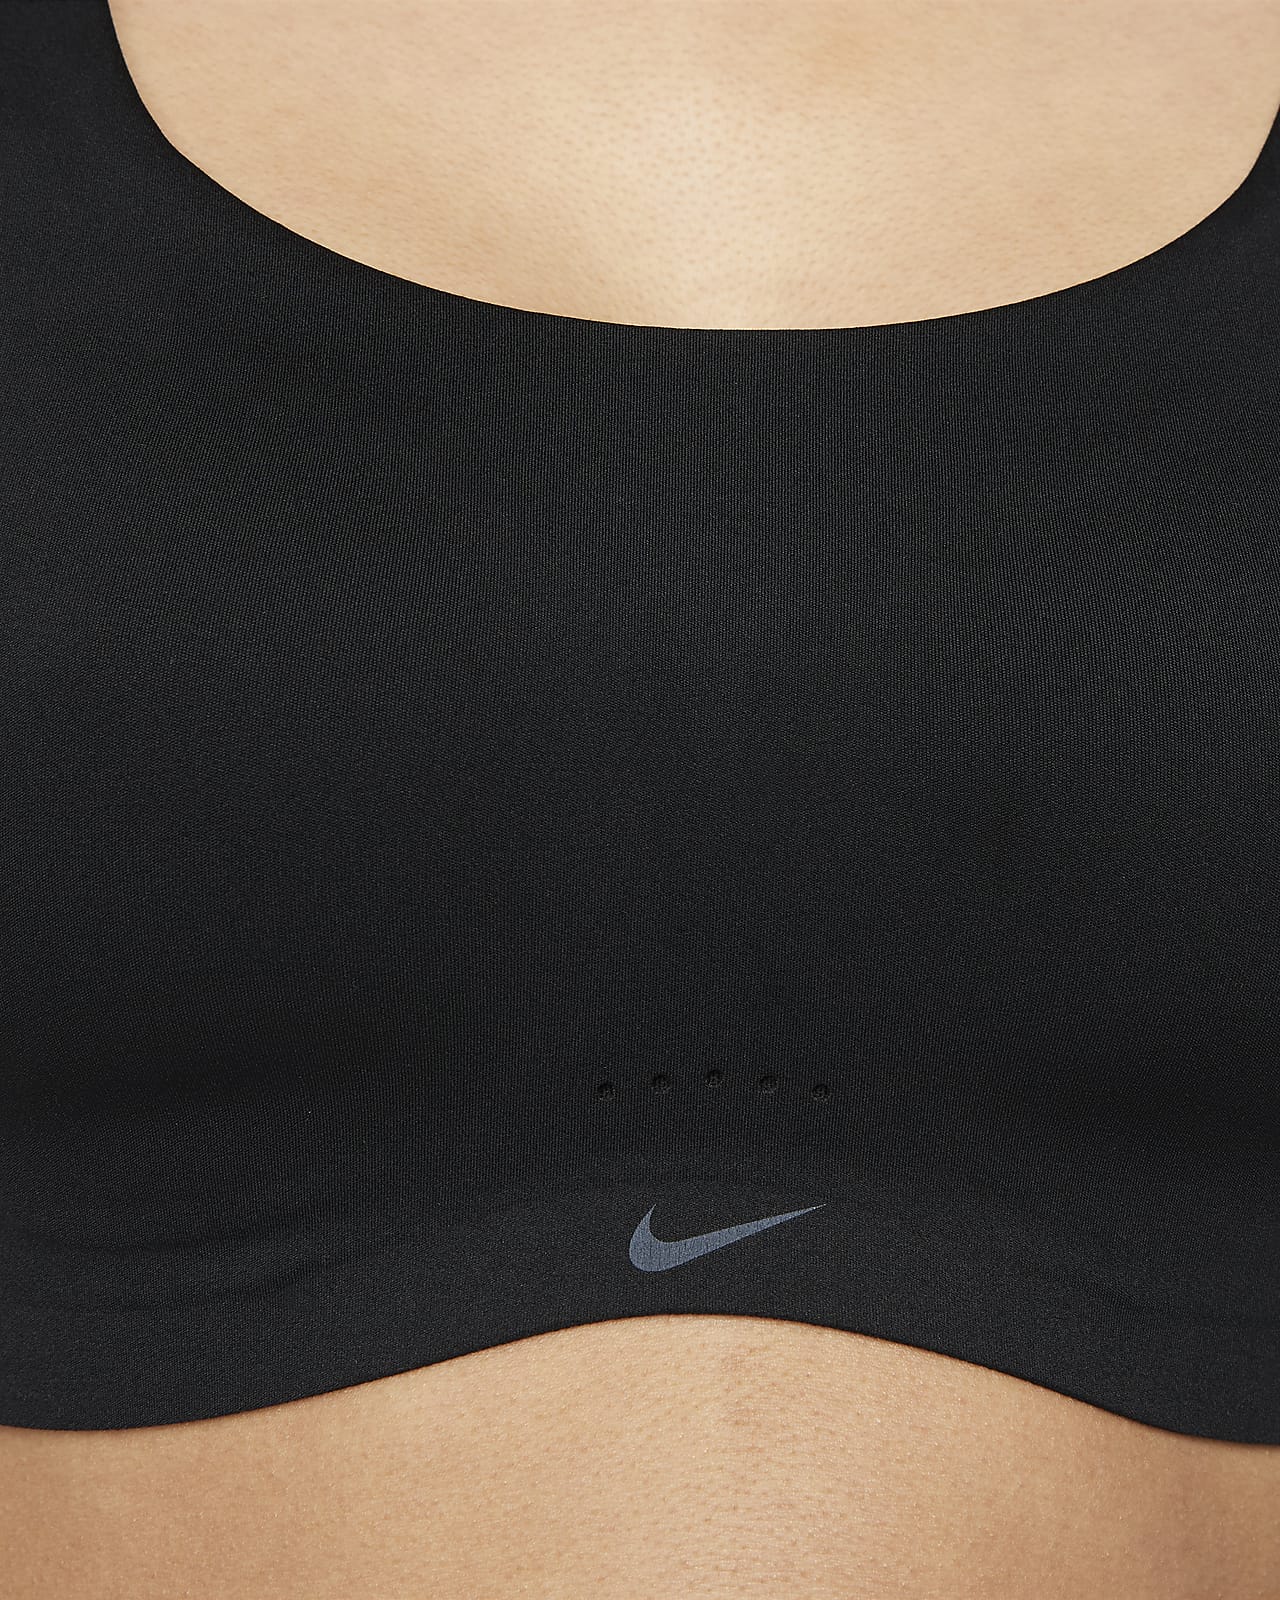 See Price in Bag Nike Alate Pullover Sports Bras.